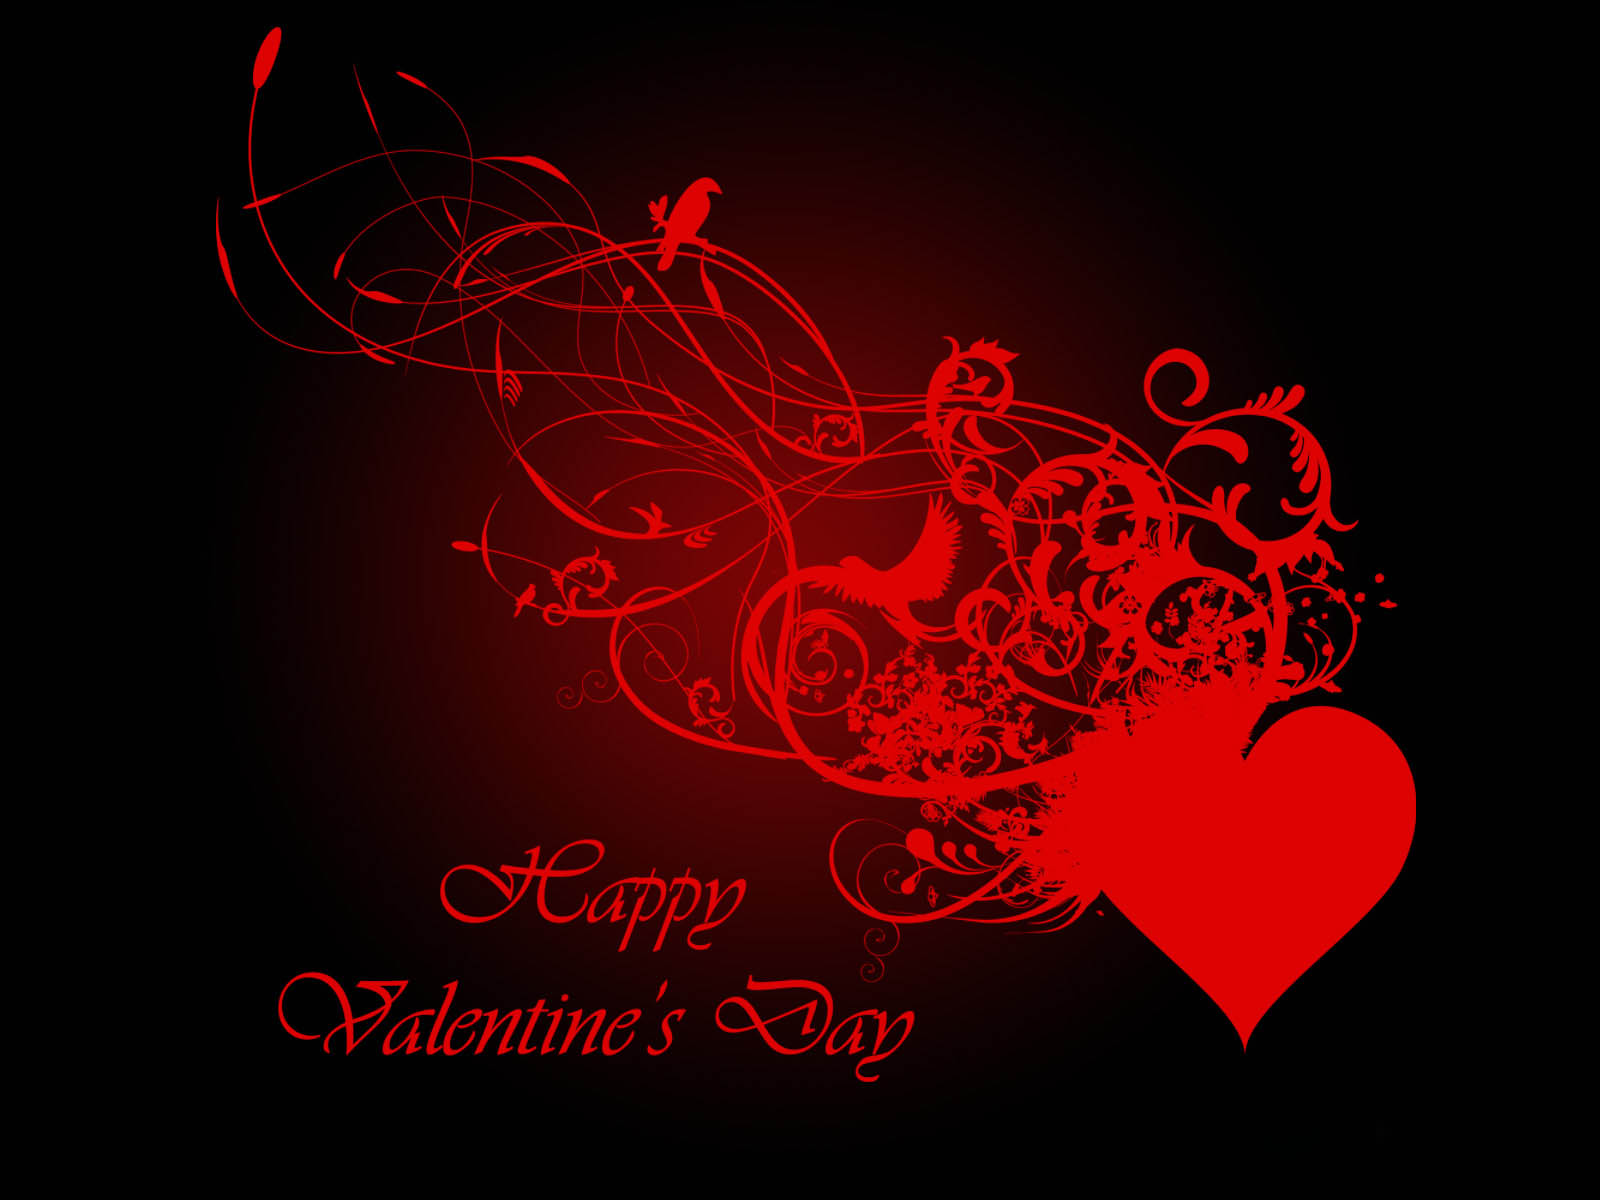 wallpapers: Valentines Day Wallpapers 2013